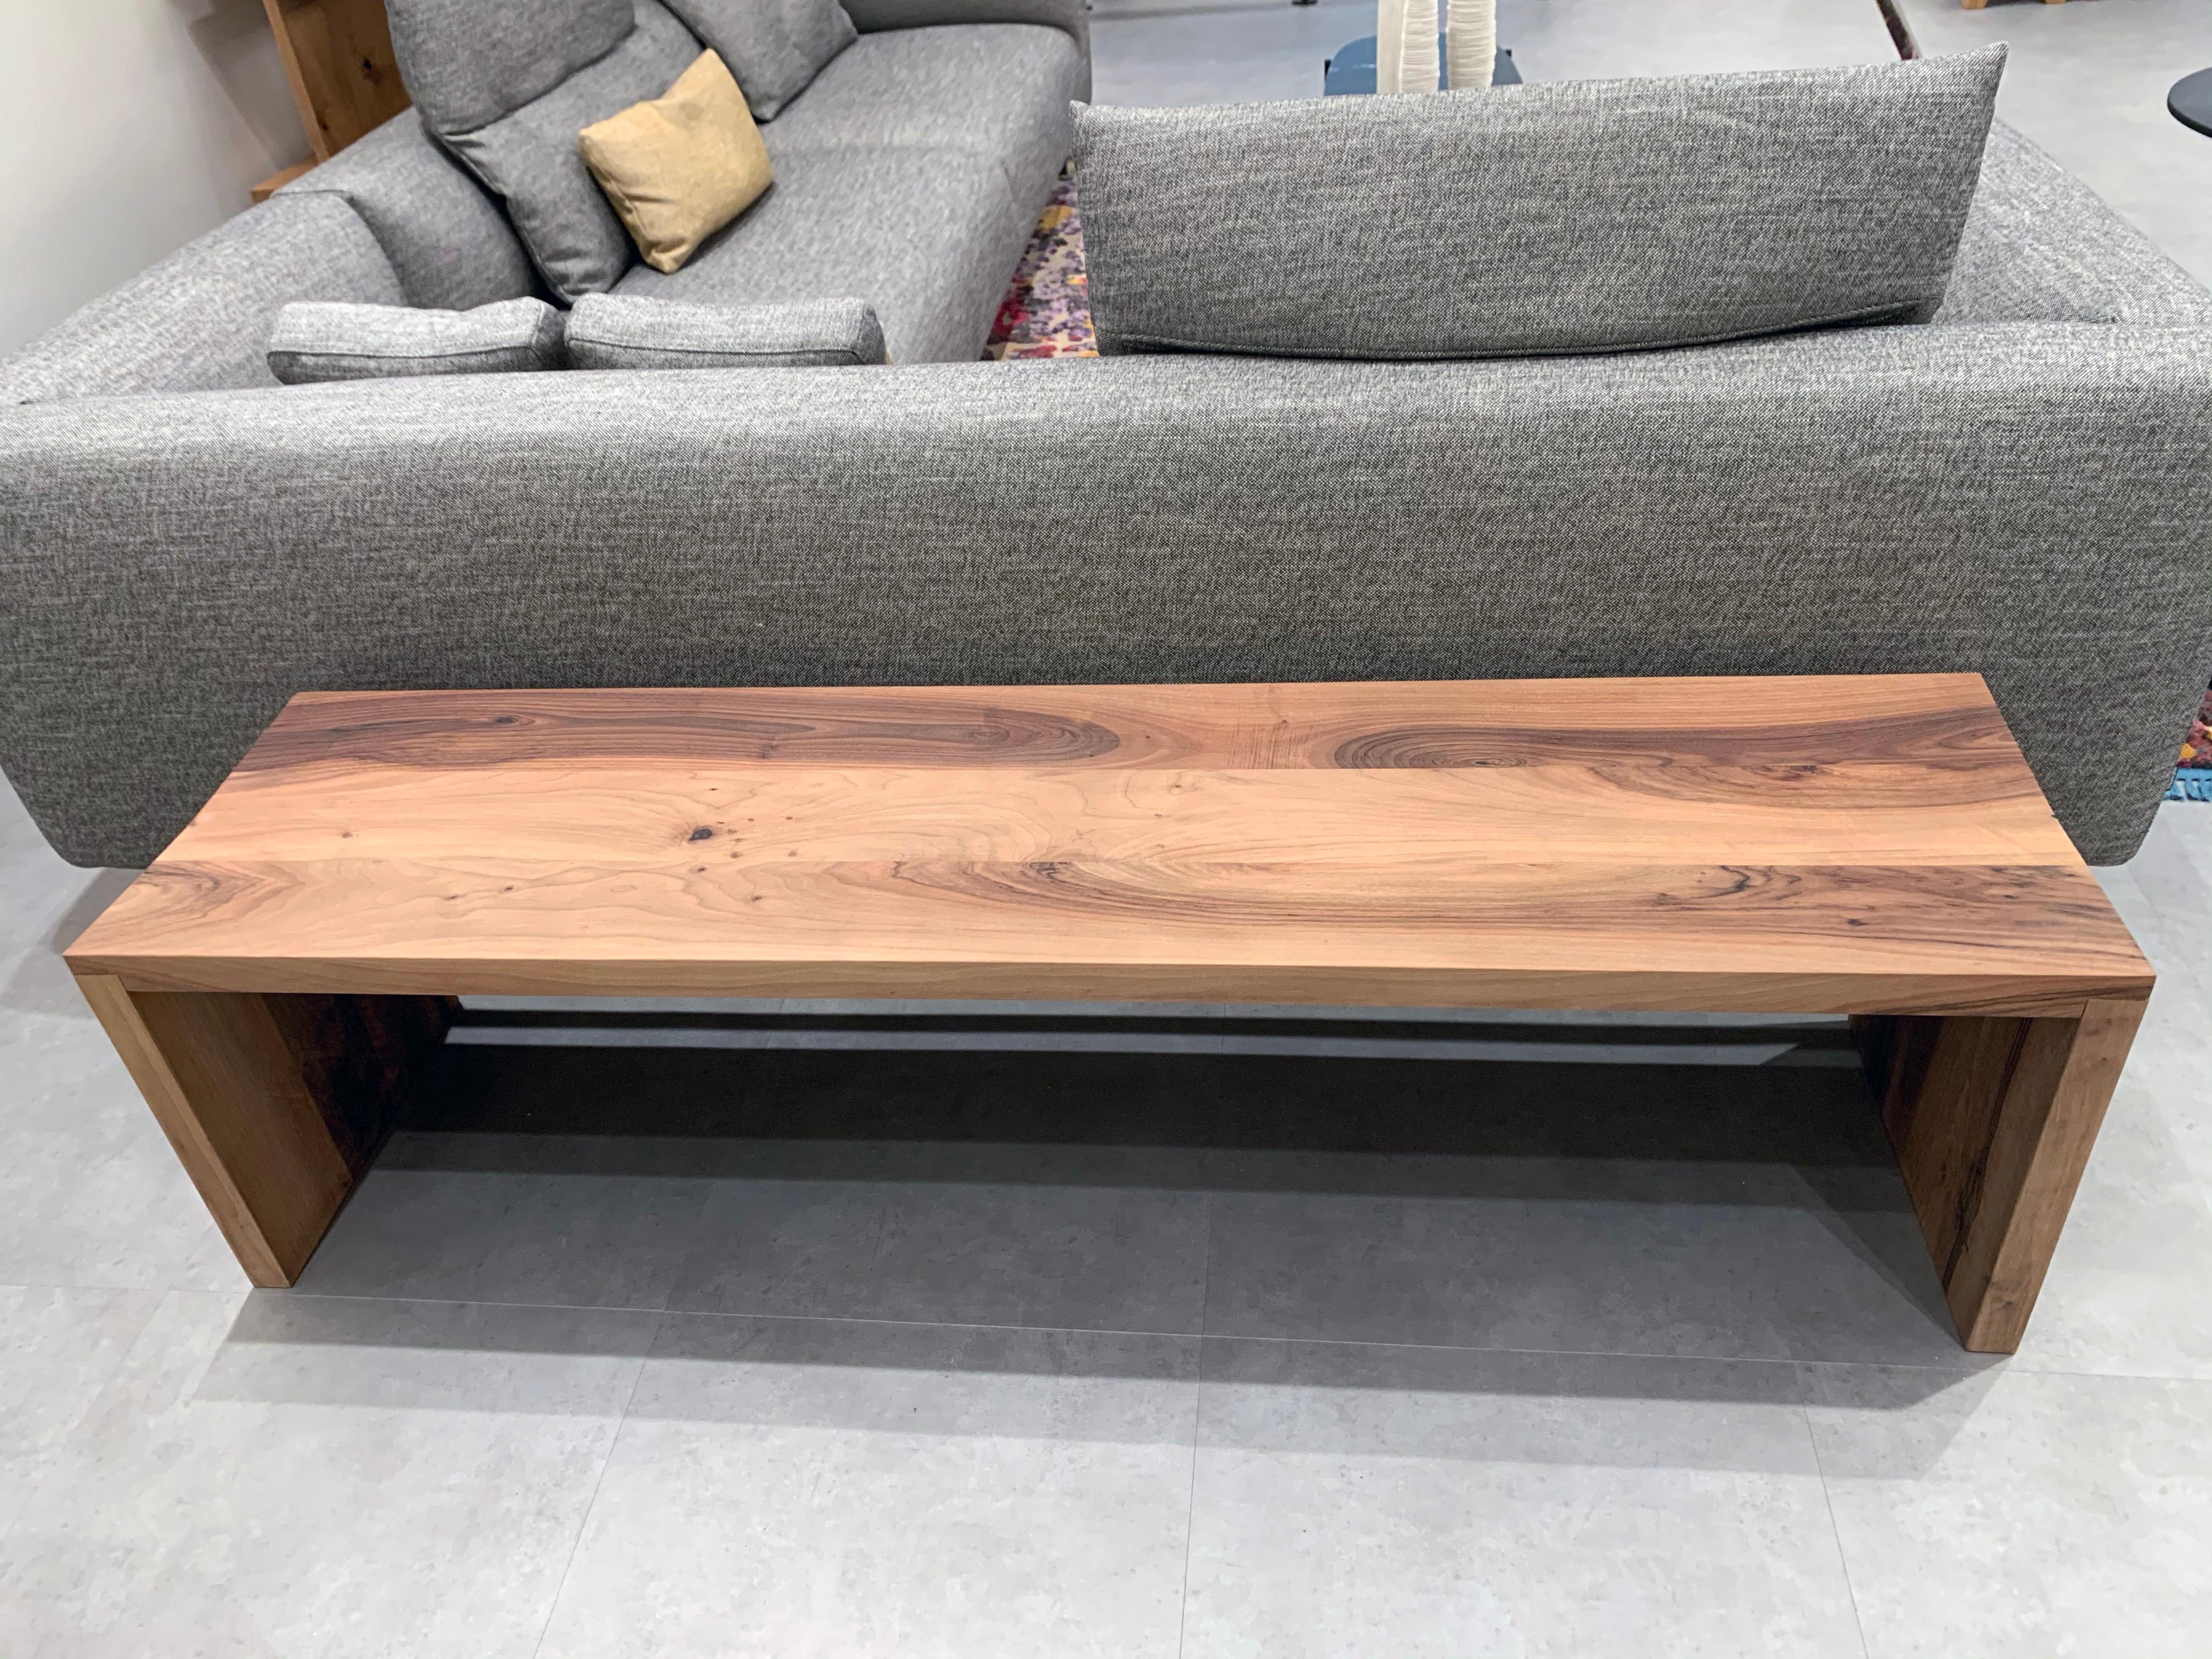 e15 Calle Bench
Design: Philipp Mainzer, 2002
Measures: 63” L x 15.75” D x 16.5” H
European walnut oiled.
The solid wood bench Calle consists of a contoured seat, two sides flushed with the seat and a support beam underneath. The top surface tapers